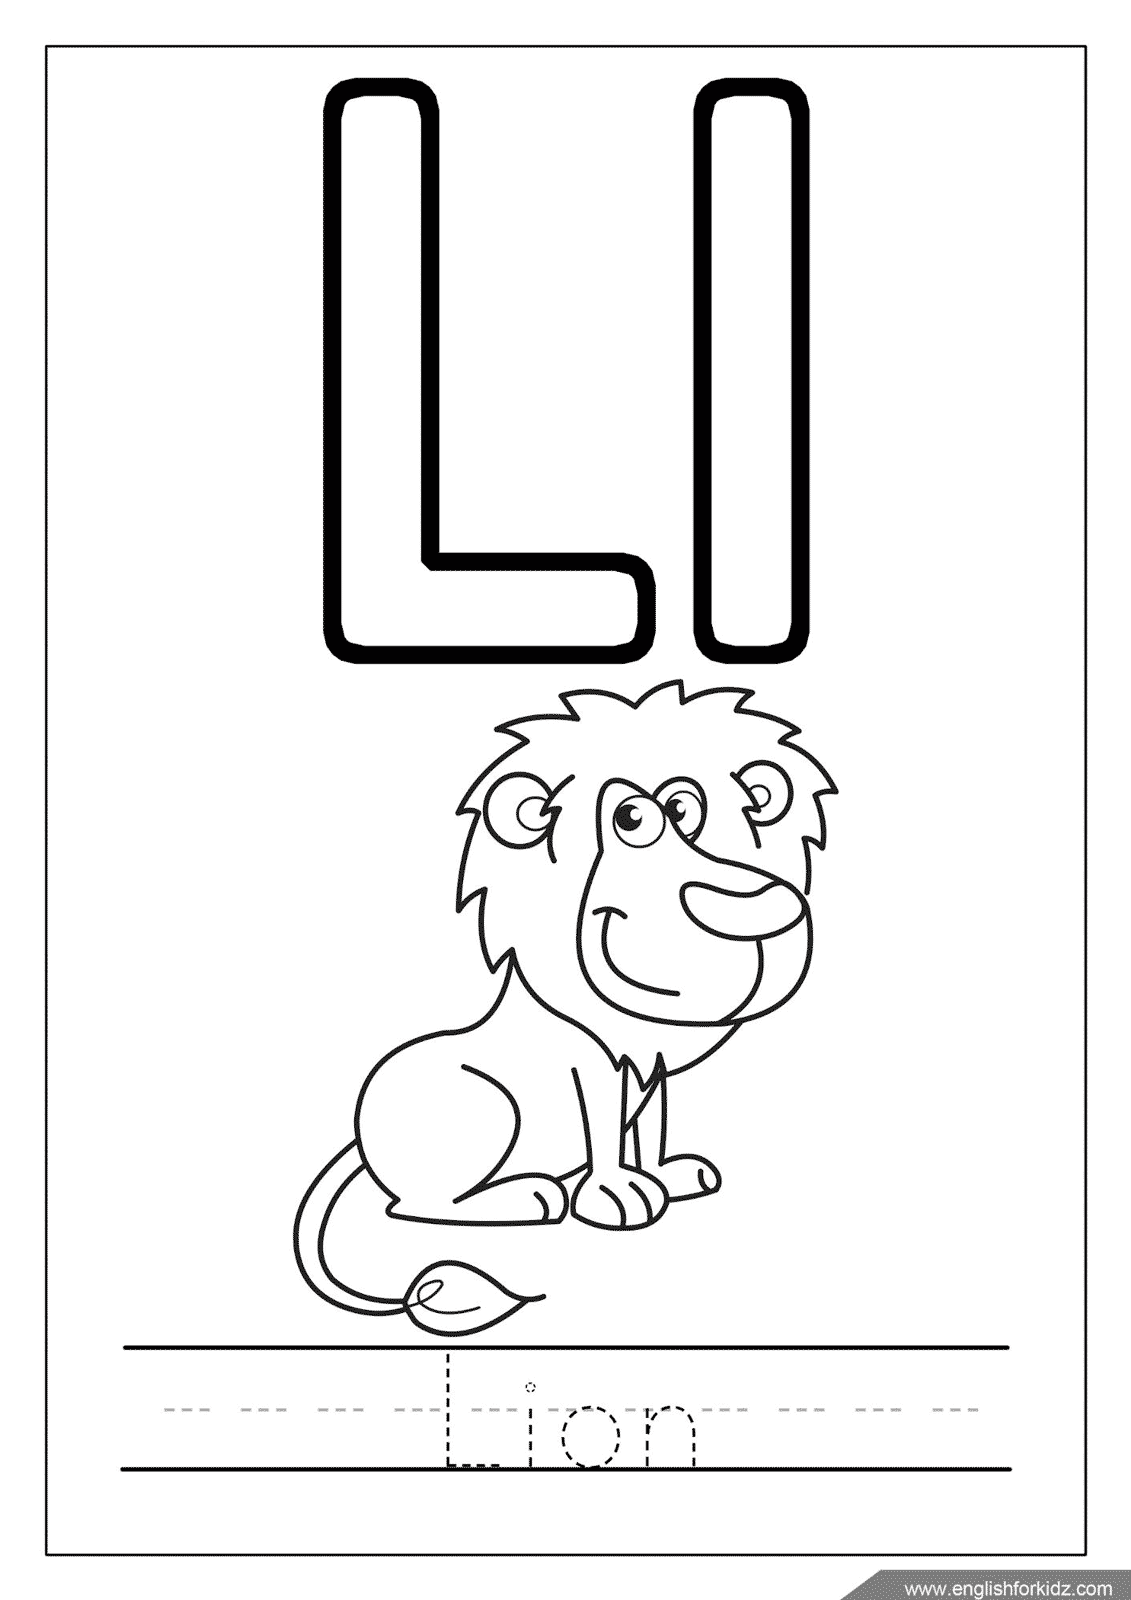 English for kids step by step letter l worksheets flash cards coloring pages